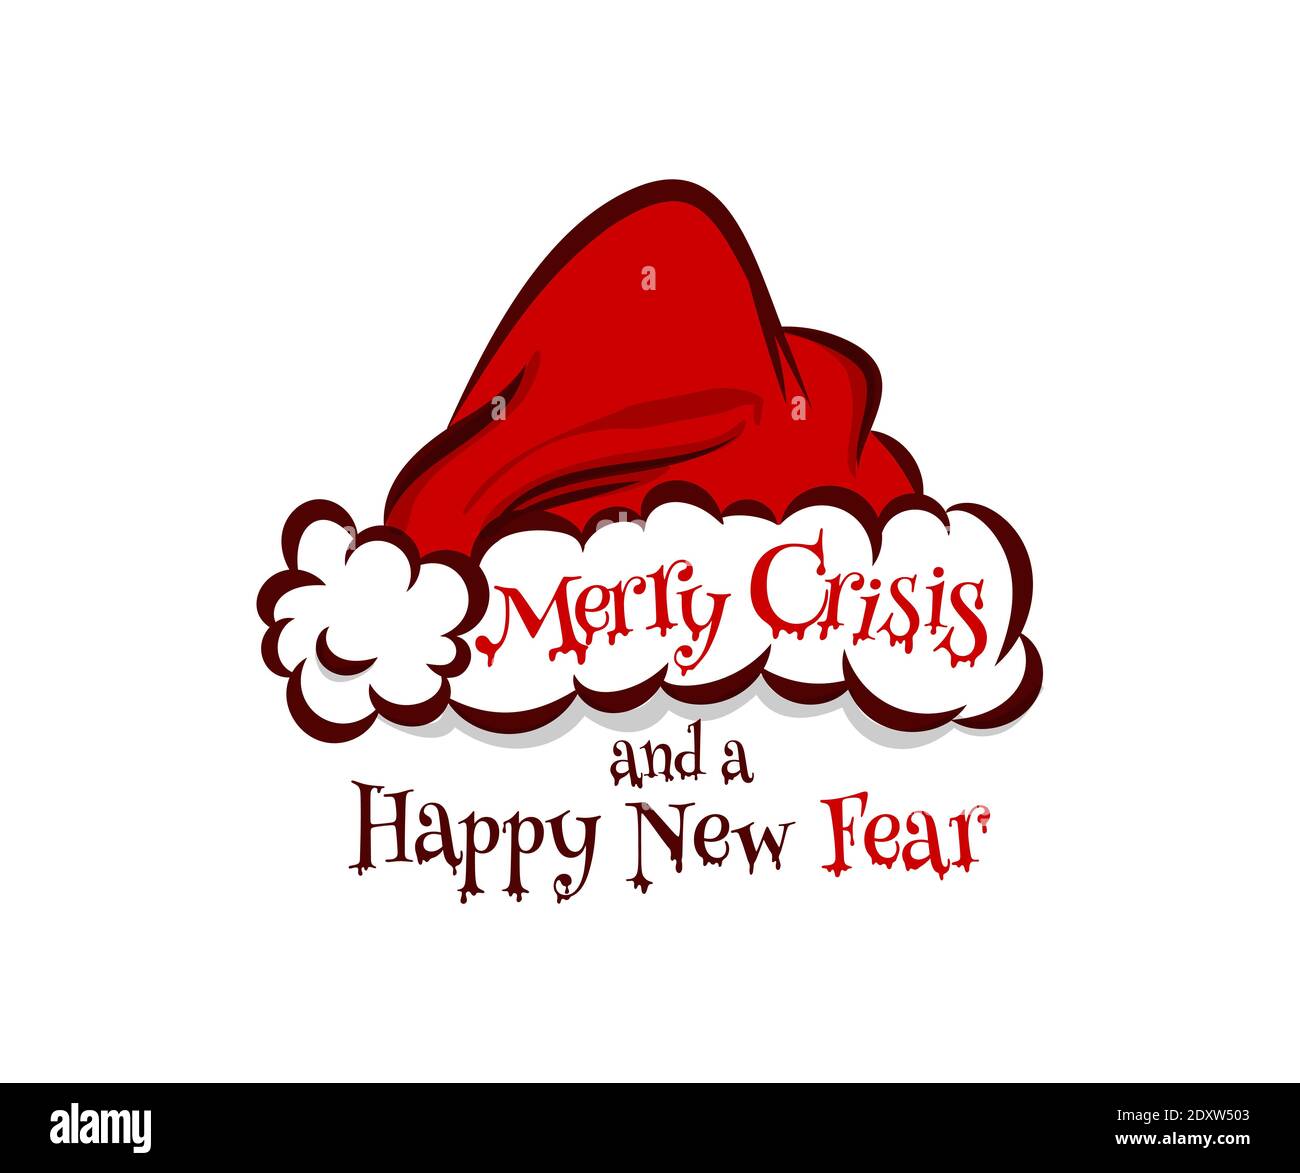 Merry Crisis and Happy New Fear joke for Christmas and happy new year greetings. Pop art comic text lettering. Red Santa Claus hat. Stock Vector